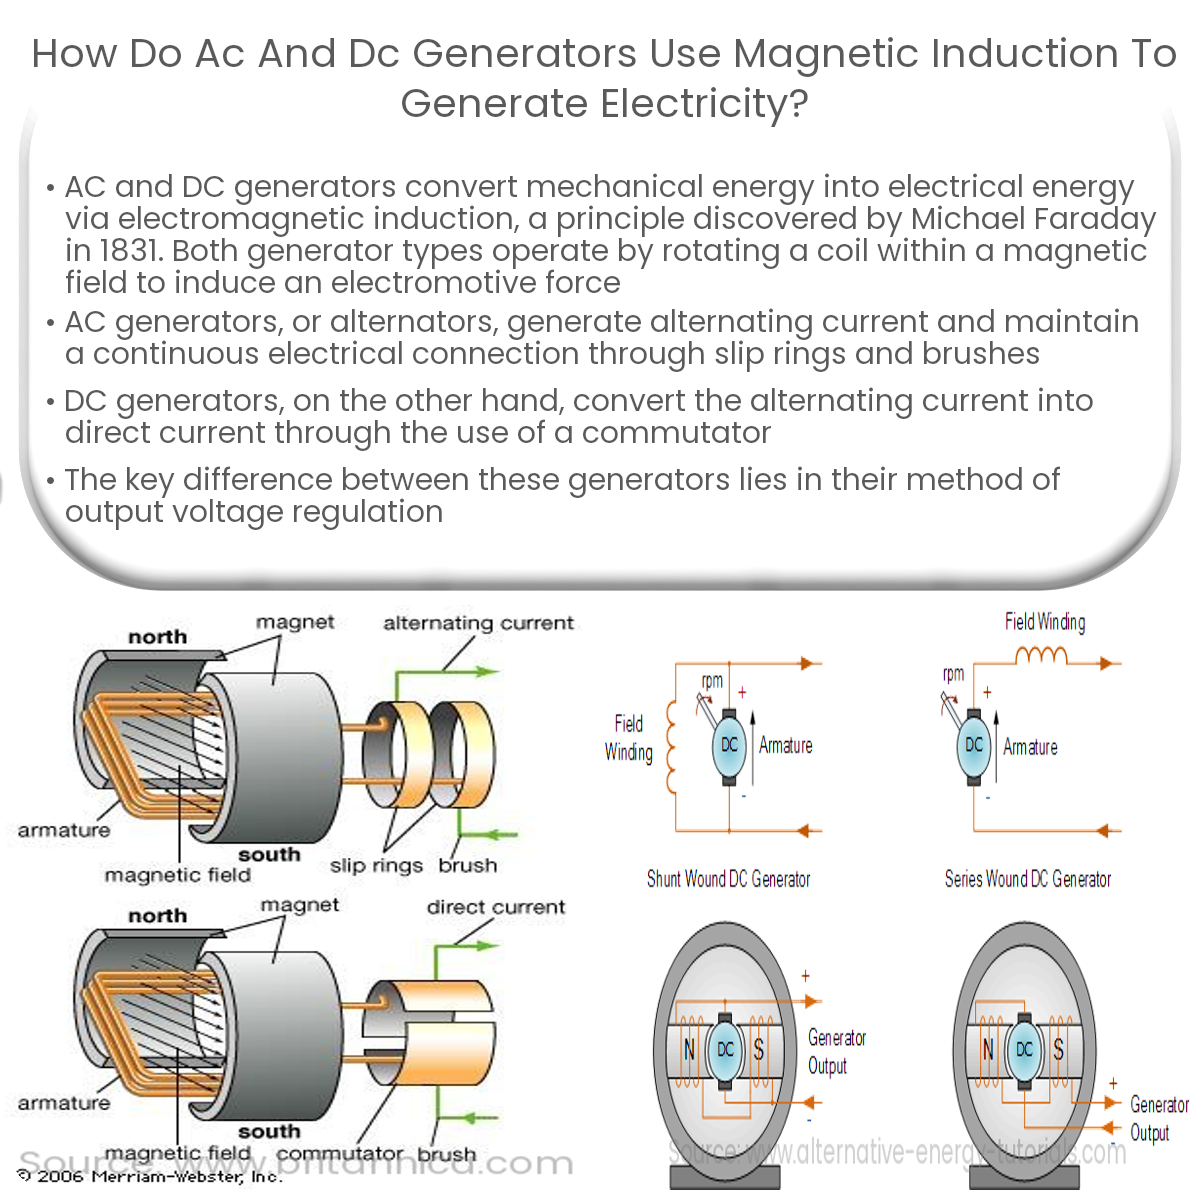 How do AC and DC generators use magnetic induction to generate